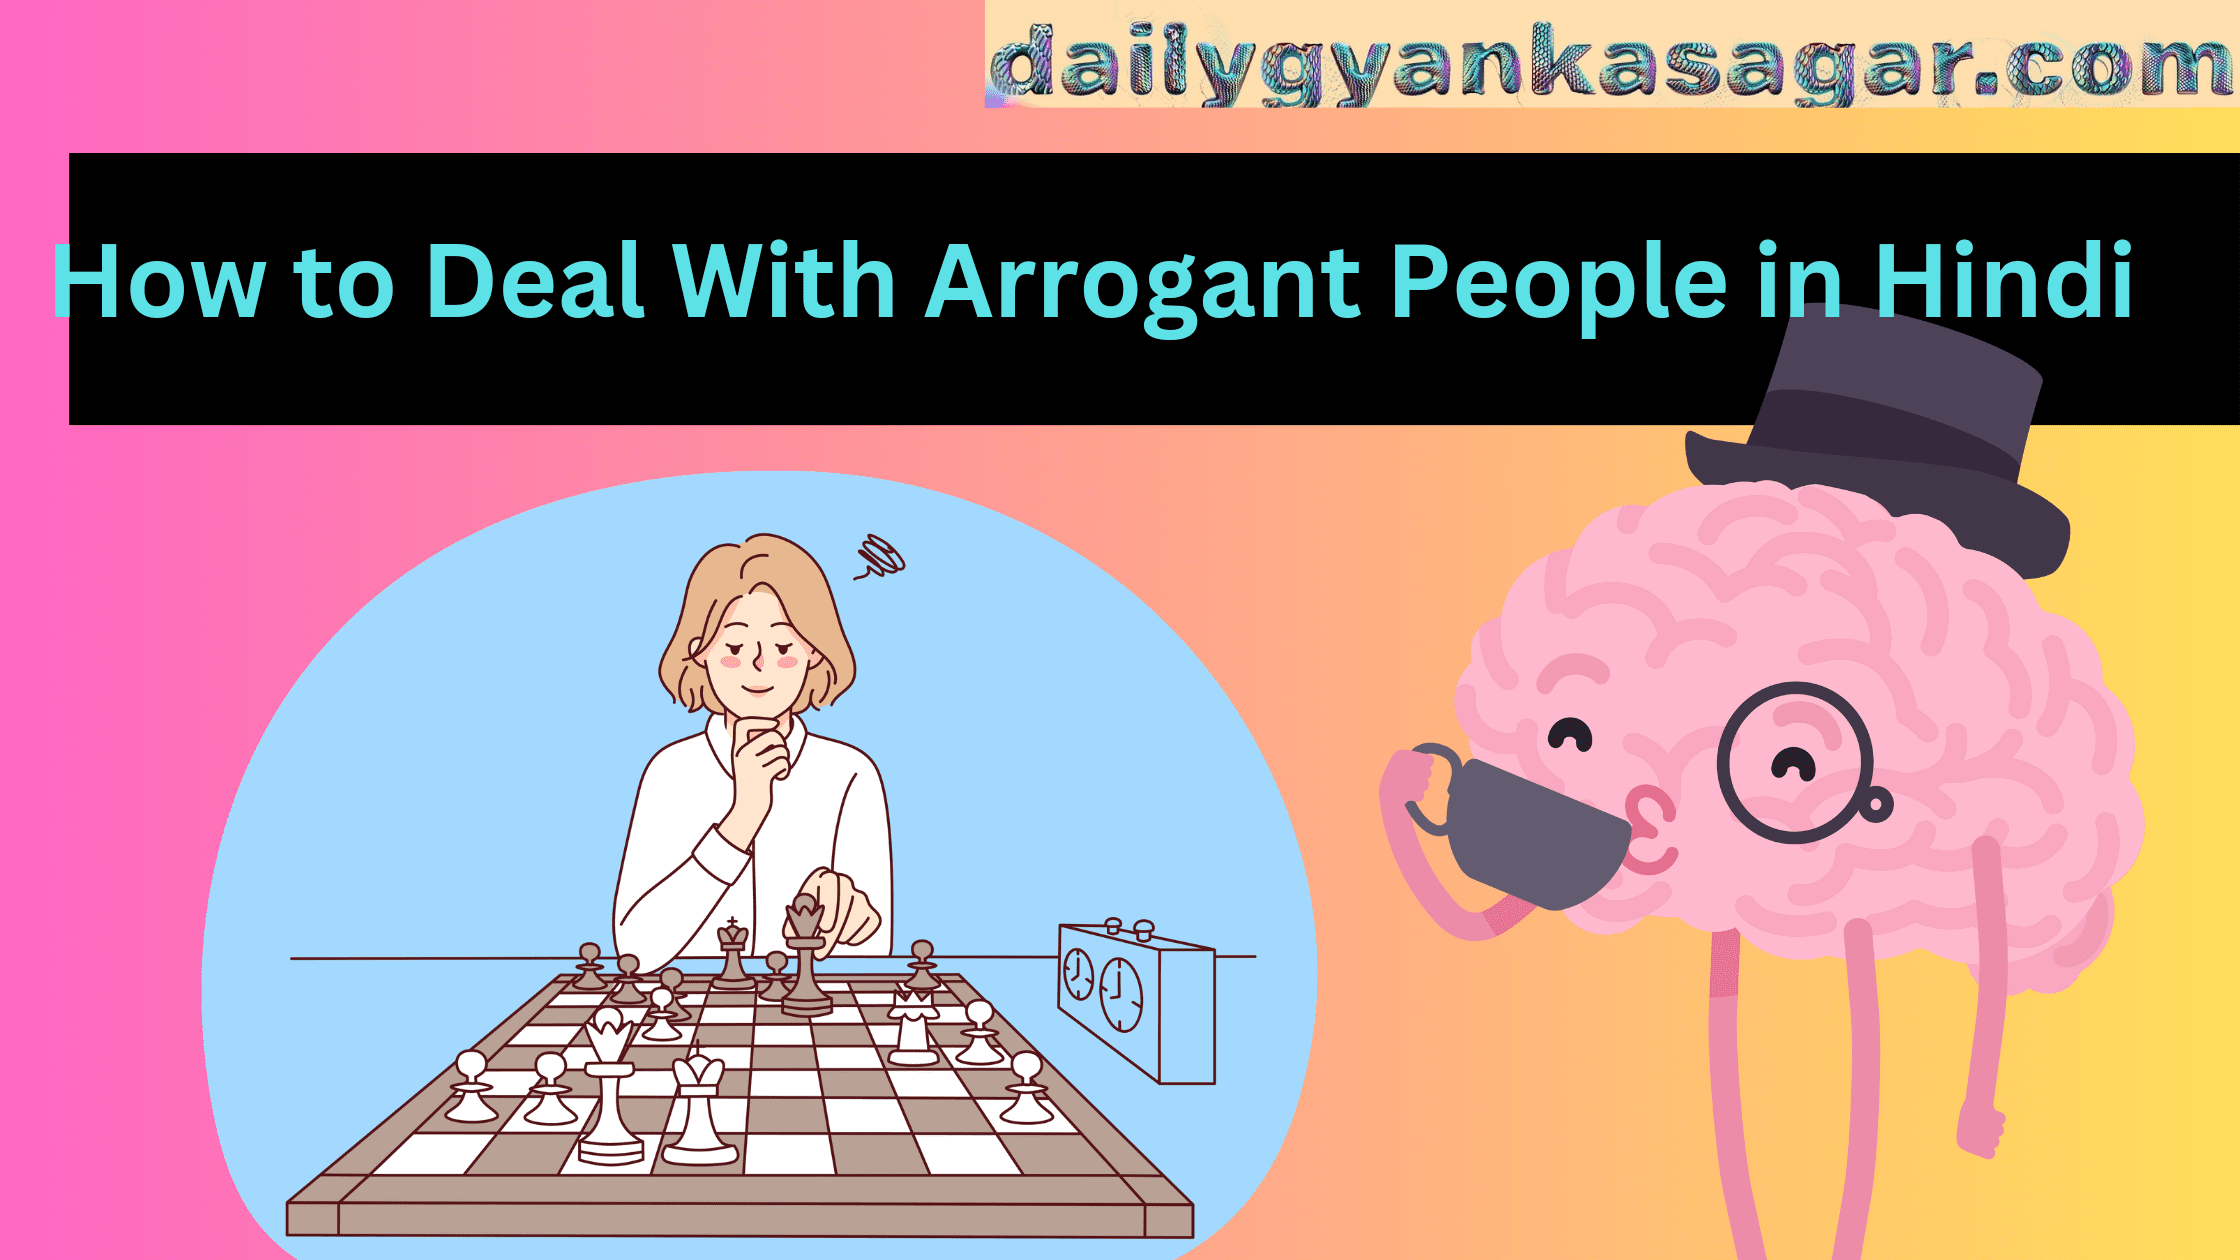 How to Deal With Arrogant People in Hindi